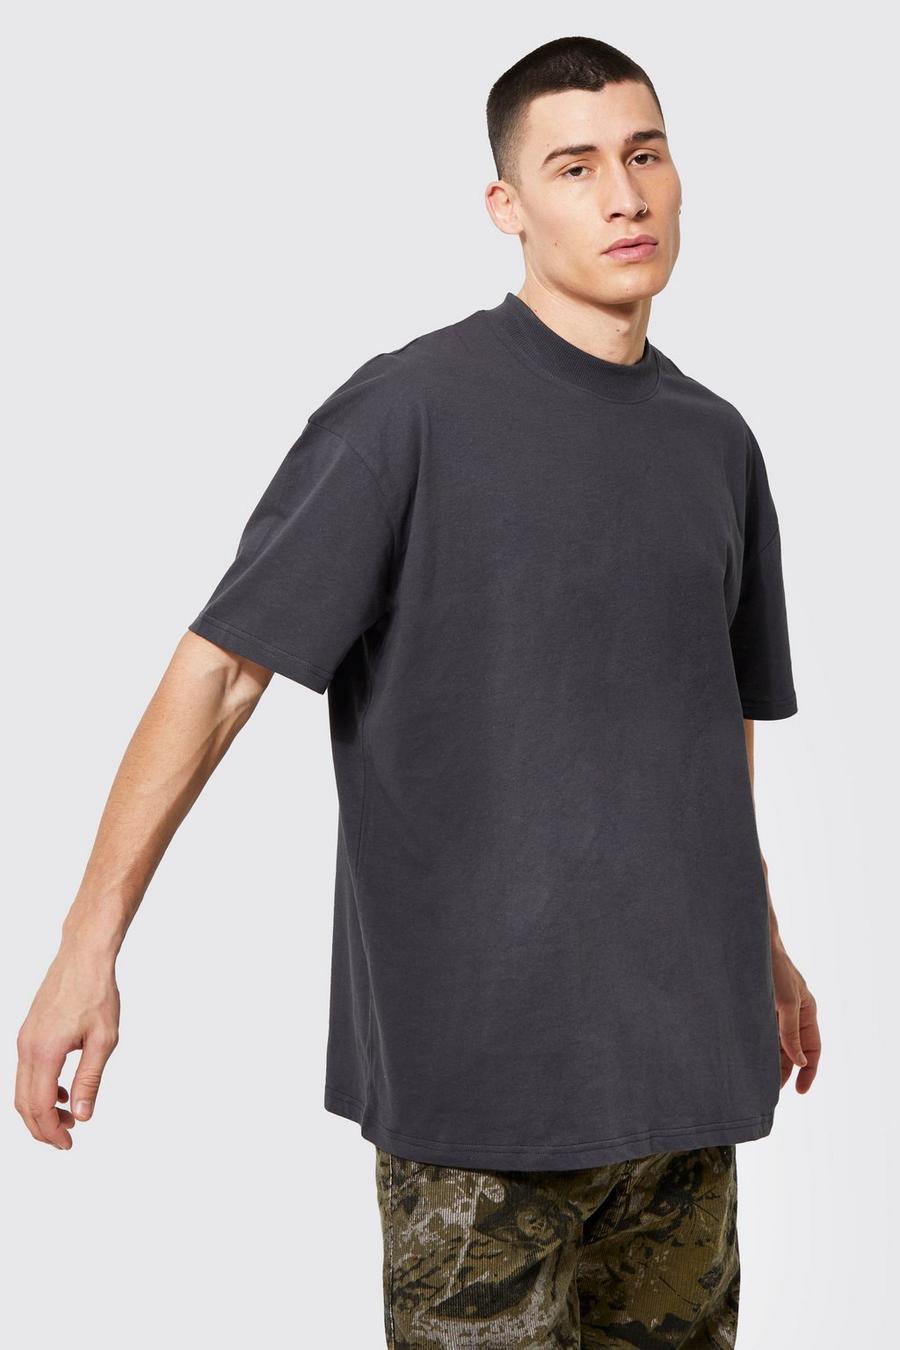 Charcoal grey Oversized Extended Neck T-Shirt image number 1